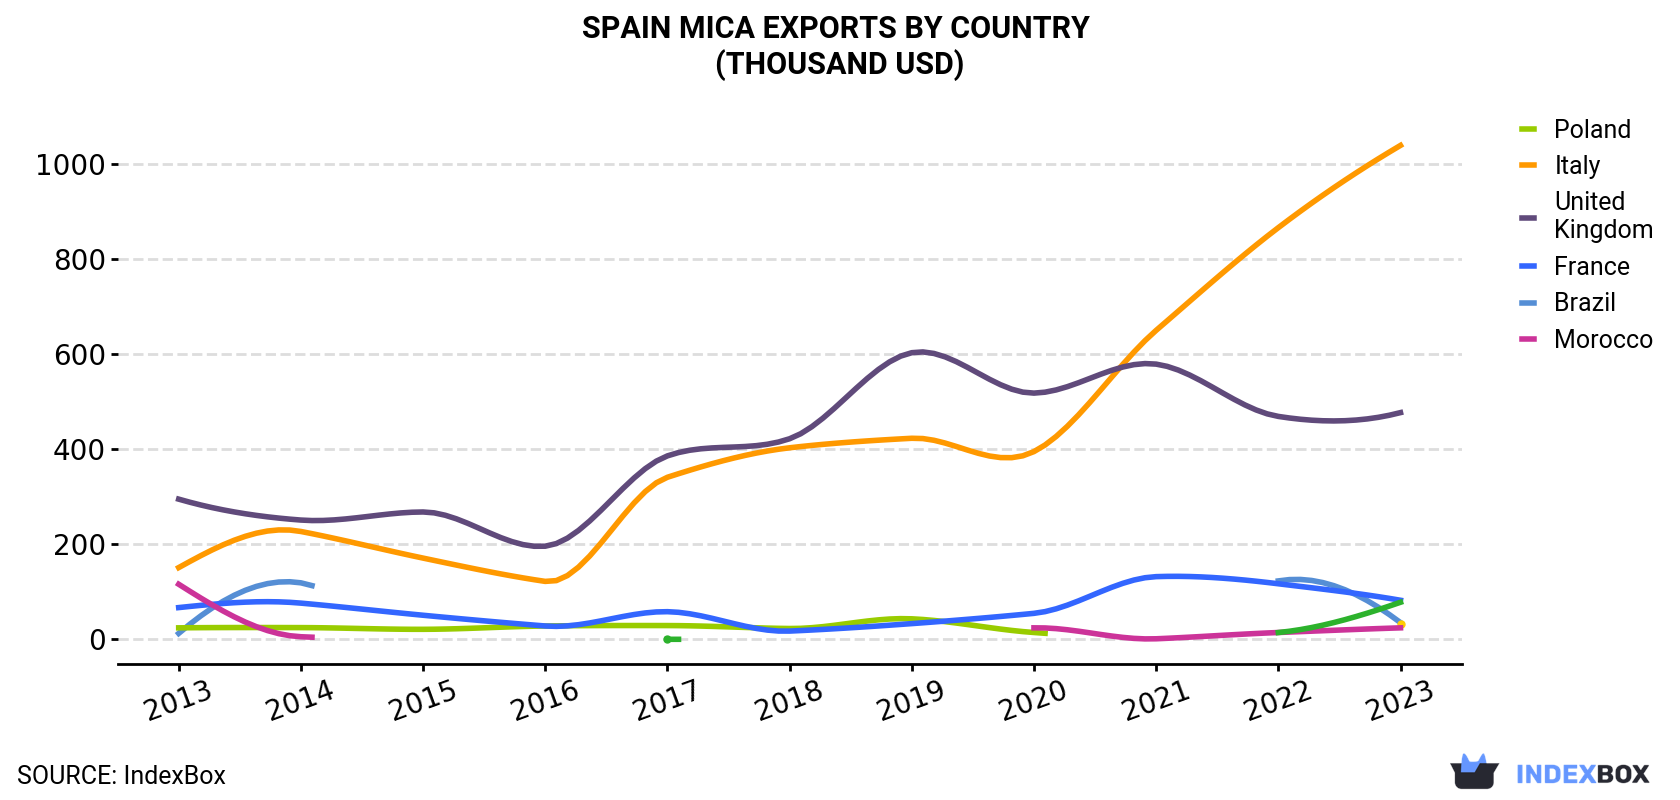 Spain Mica Exports By Country (Thousand USD)